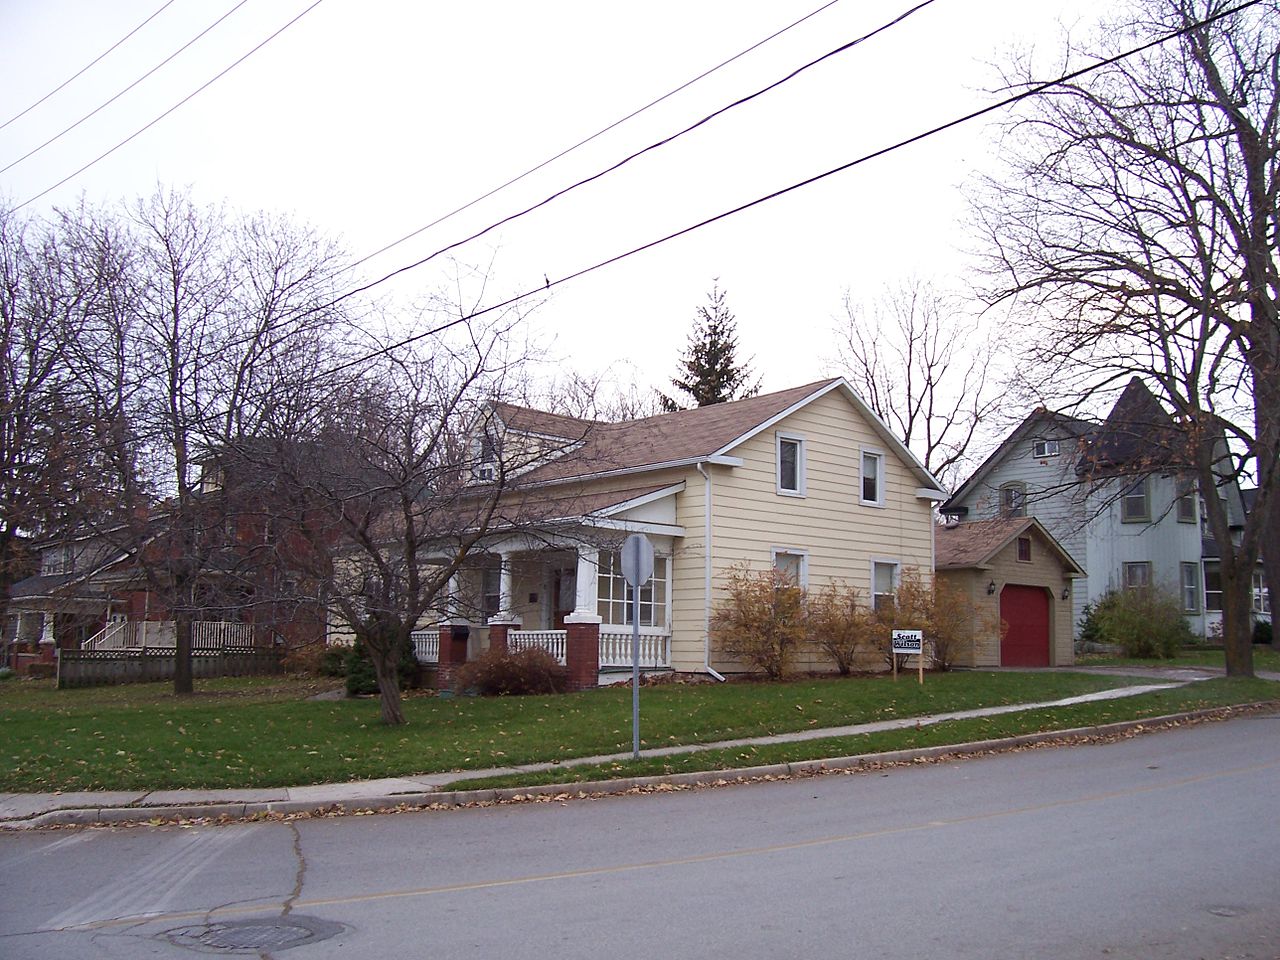 Orangeville founders home showing the city's heritage for an Orangeville community profile